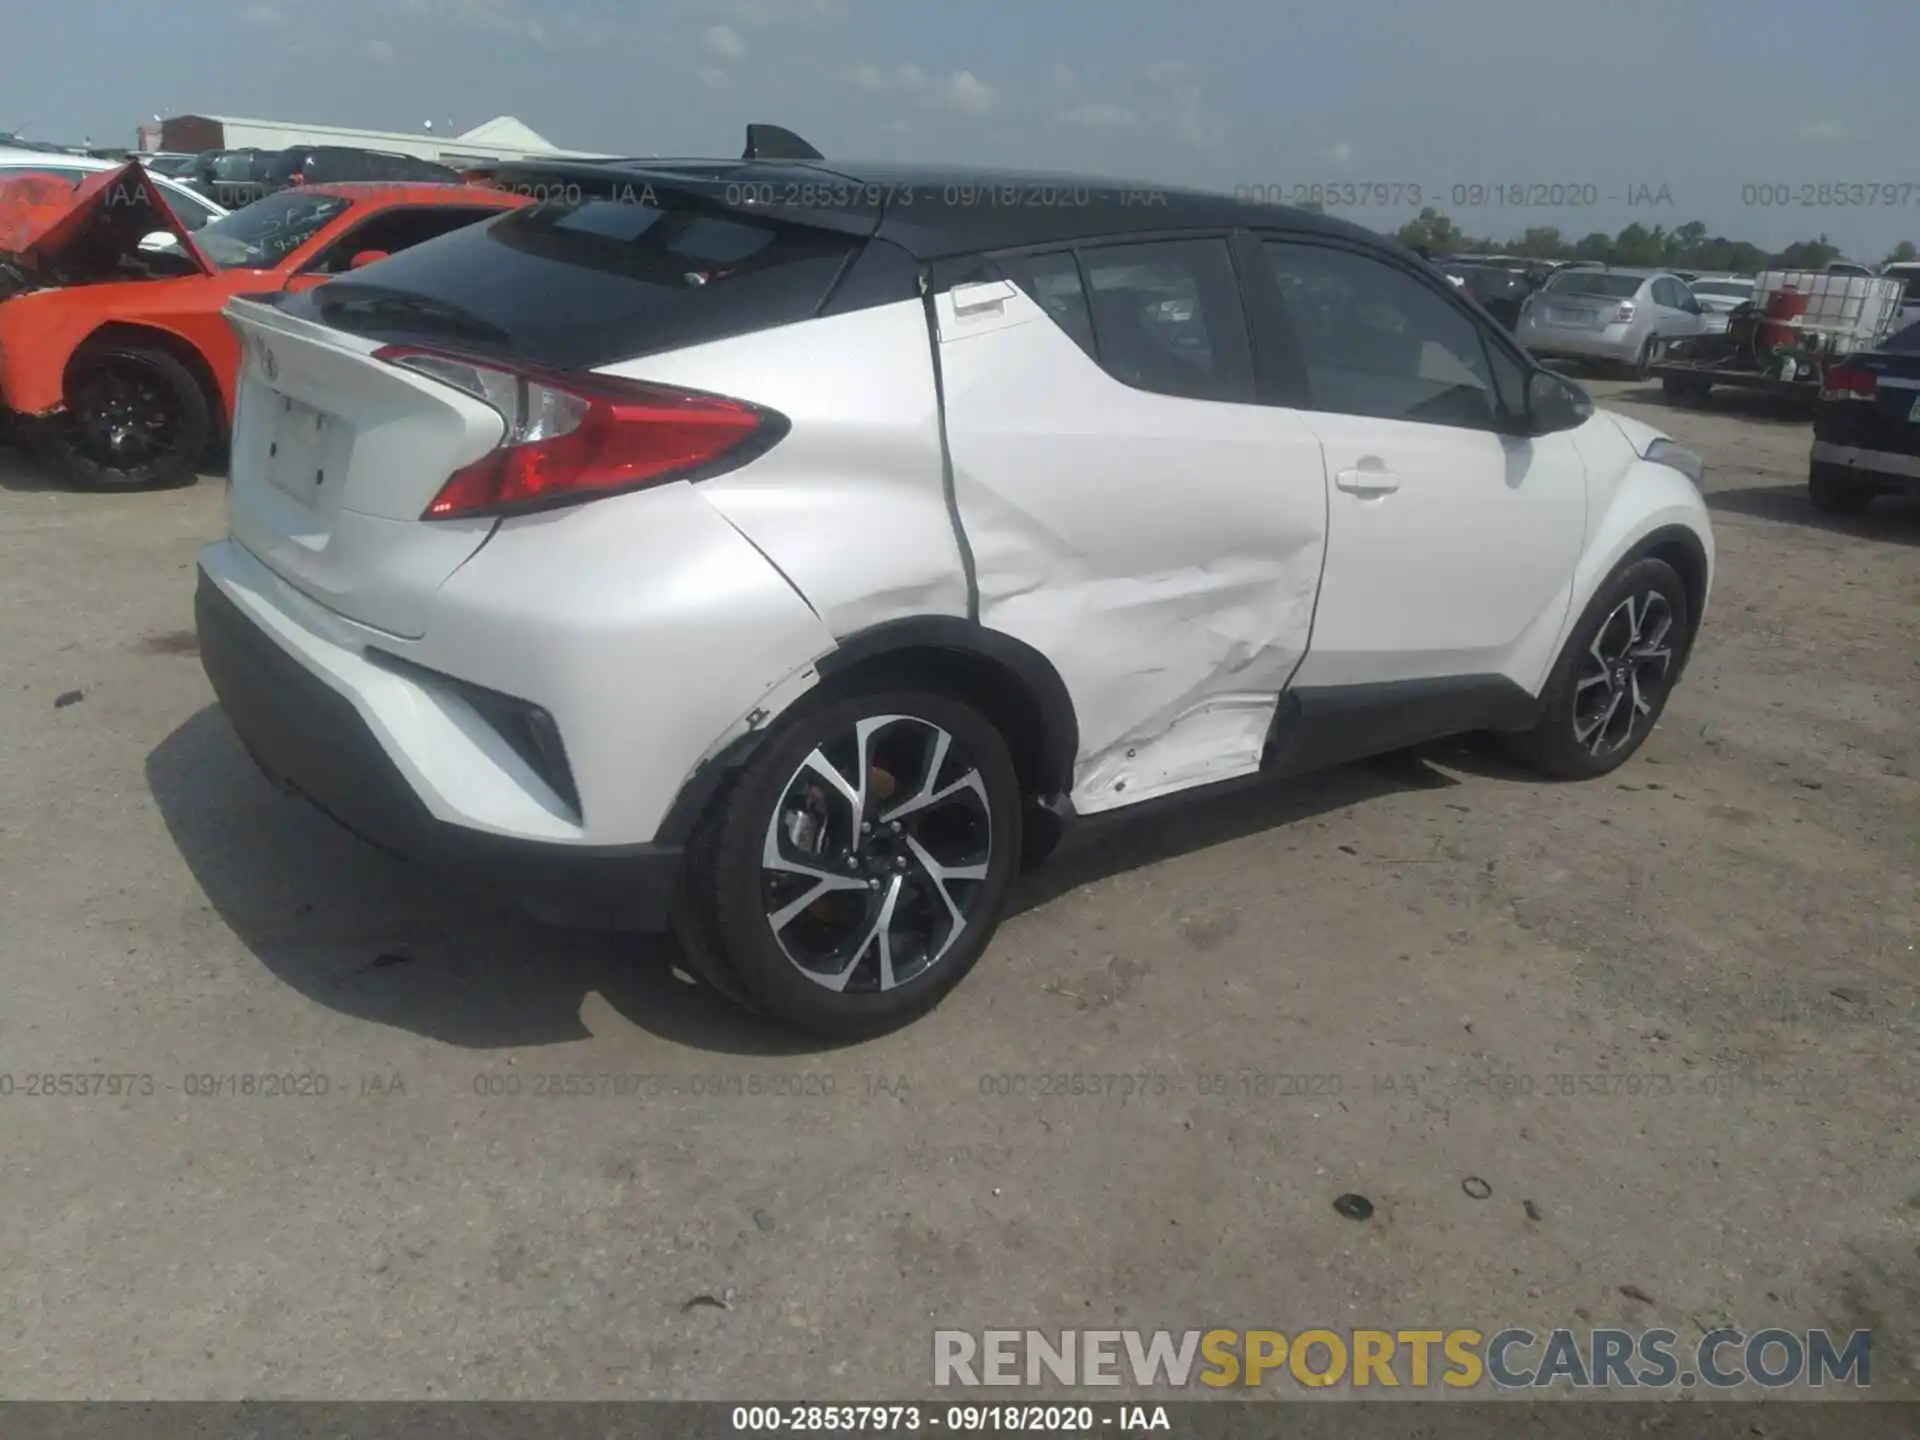 4 Photograph of a damaged car NMTKHMBXXKR085298 TOYOTA C-HR 2019